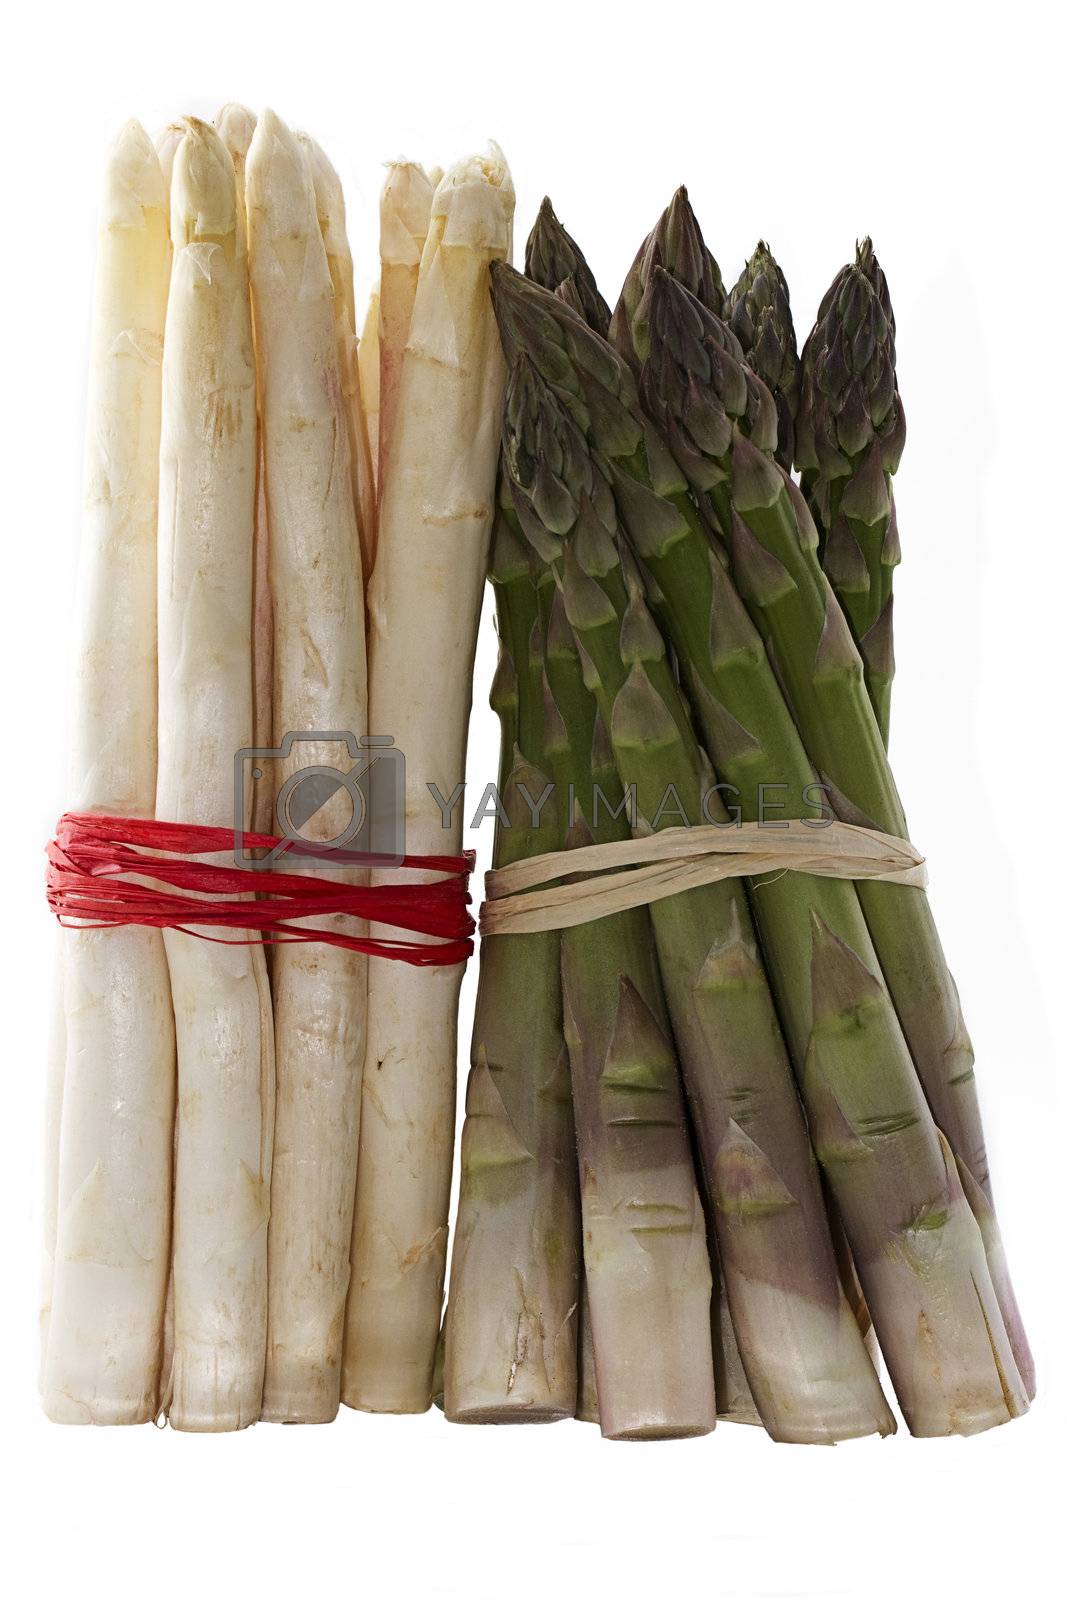 Royalty free image of green and white asparagus isolated by RobStark